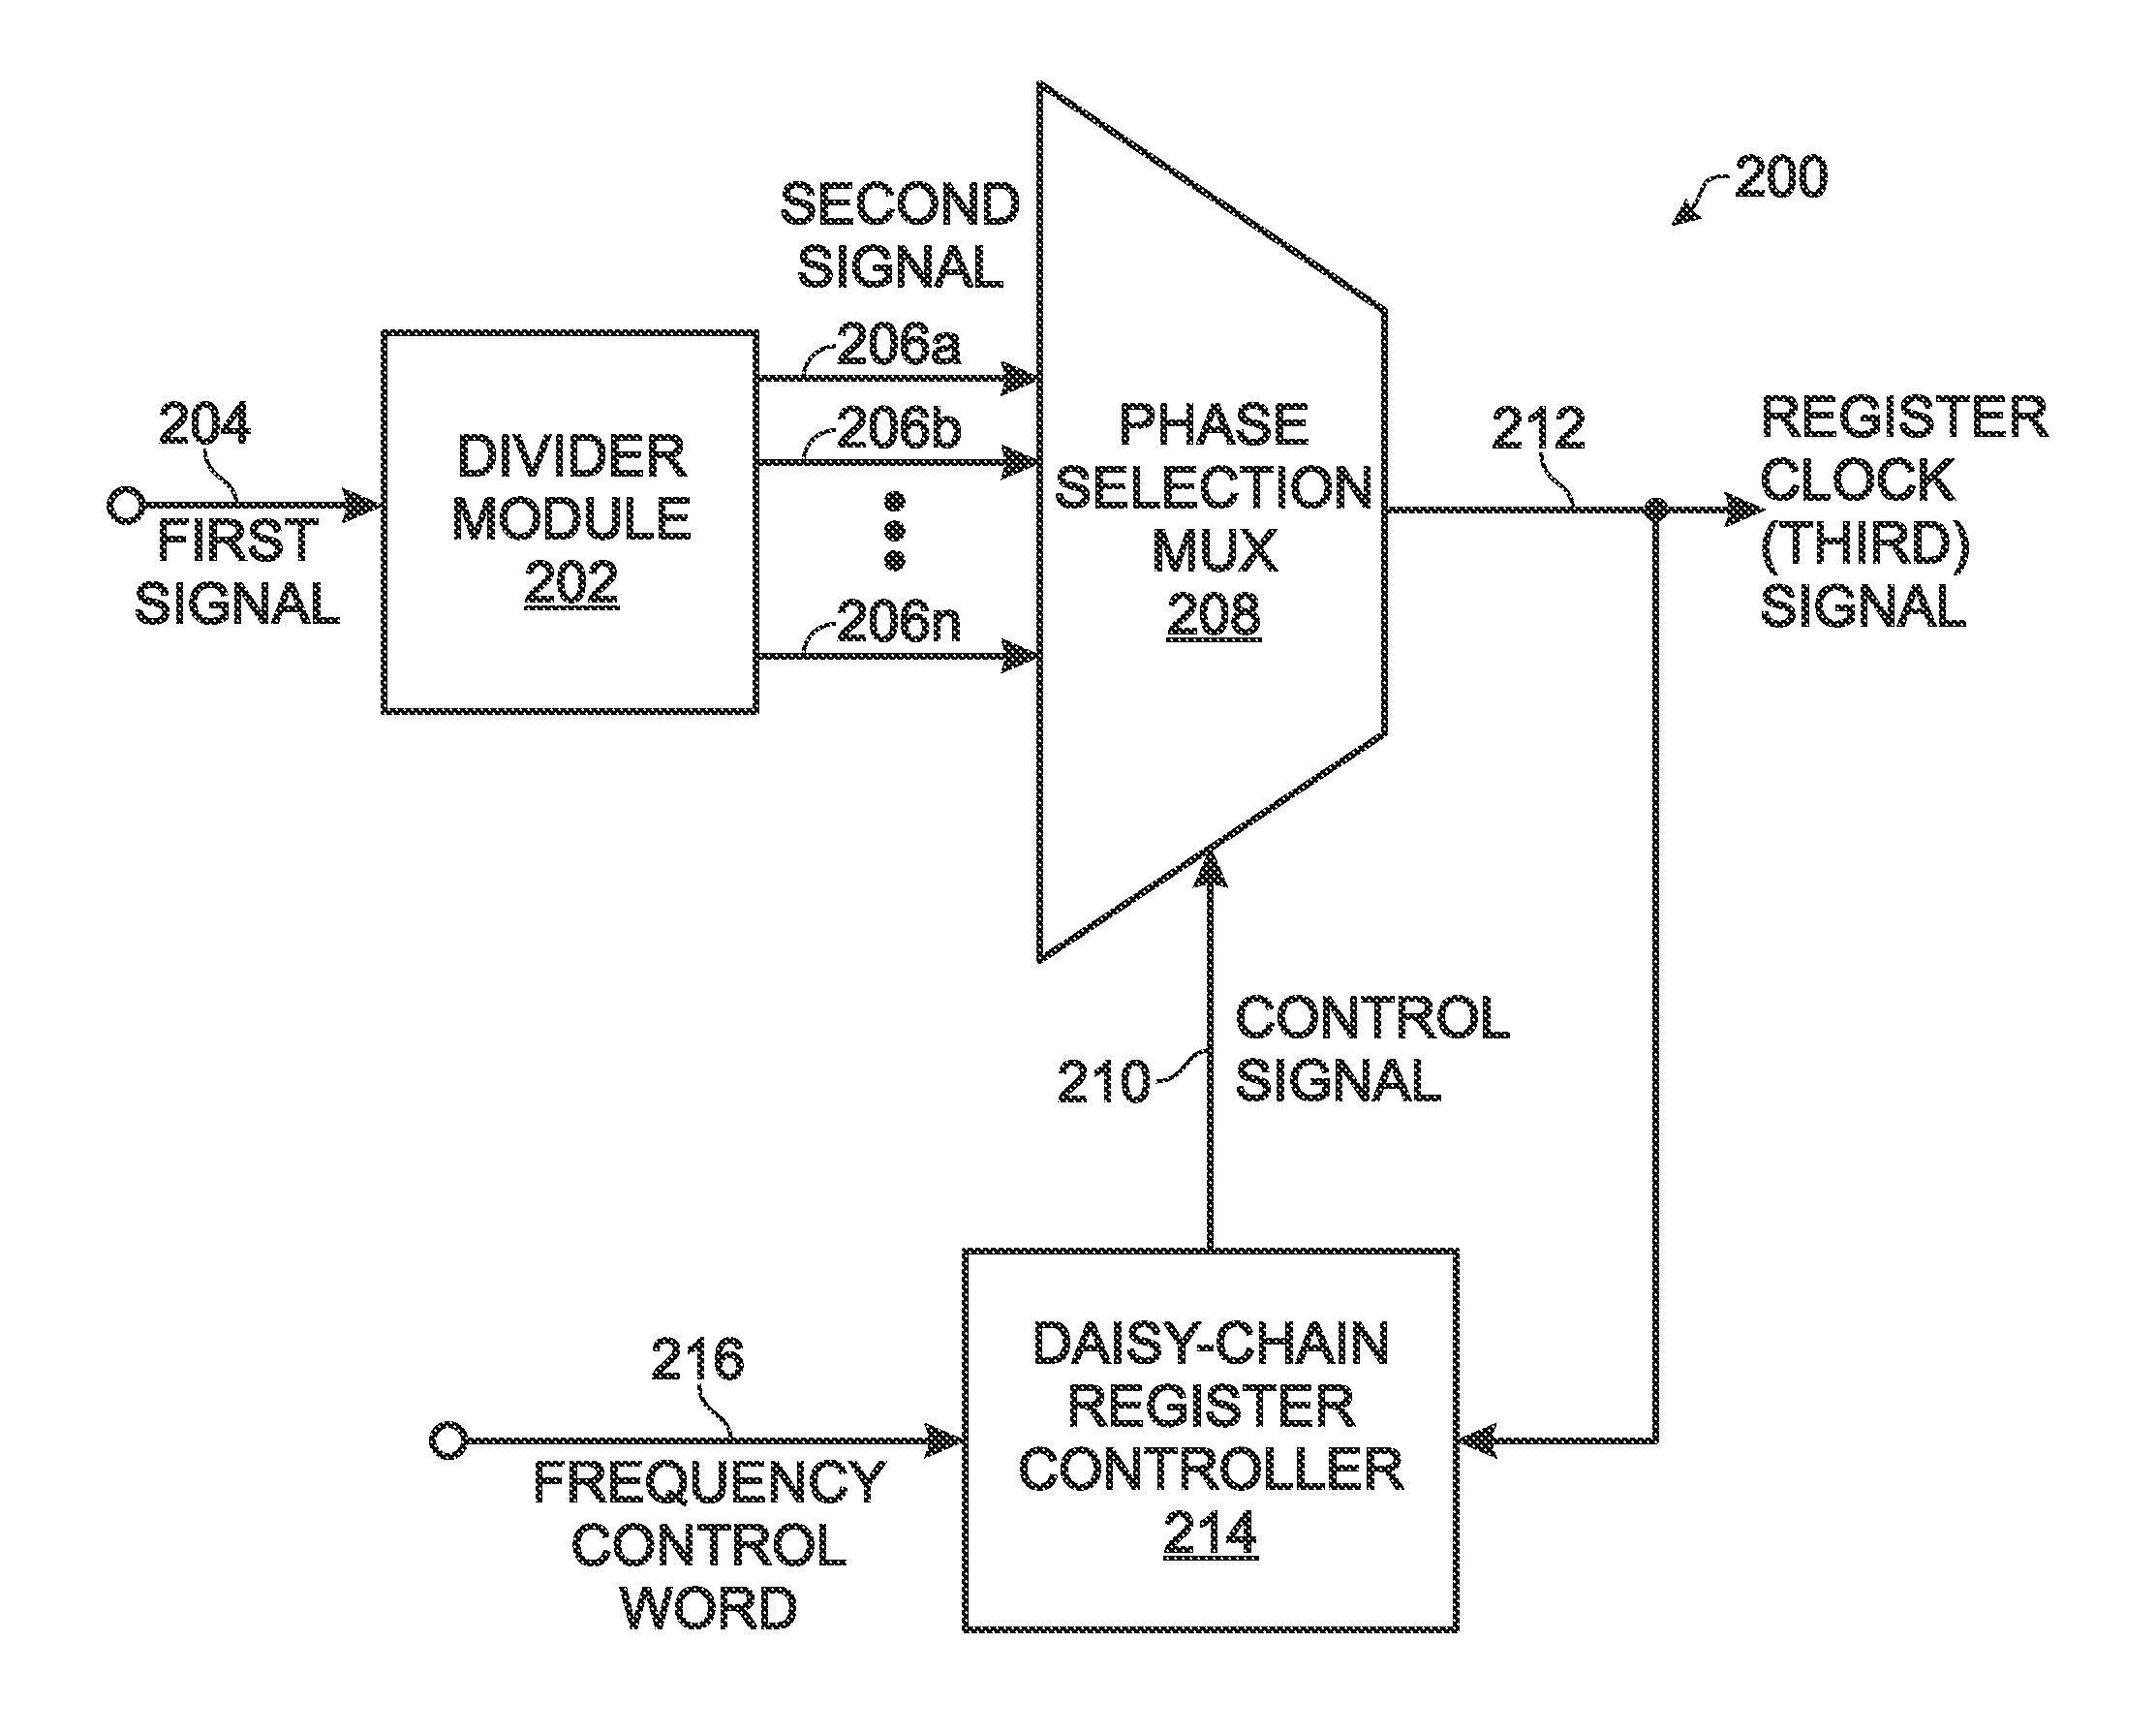 Digitally Clock with Selectable Frequency and Duty Cycle